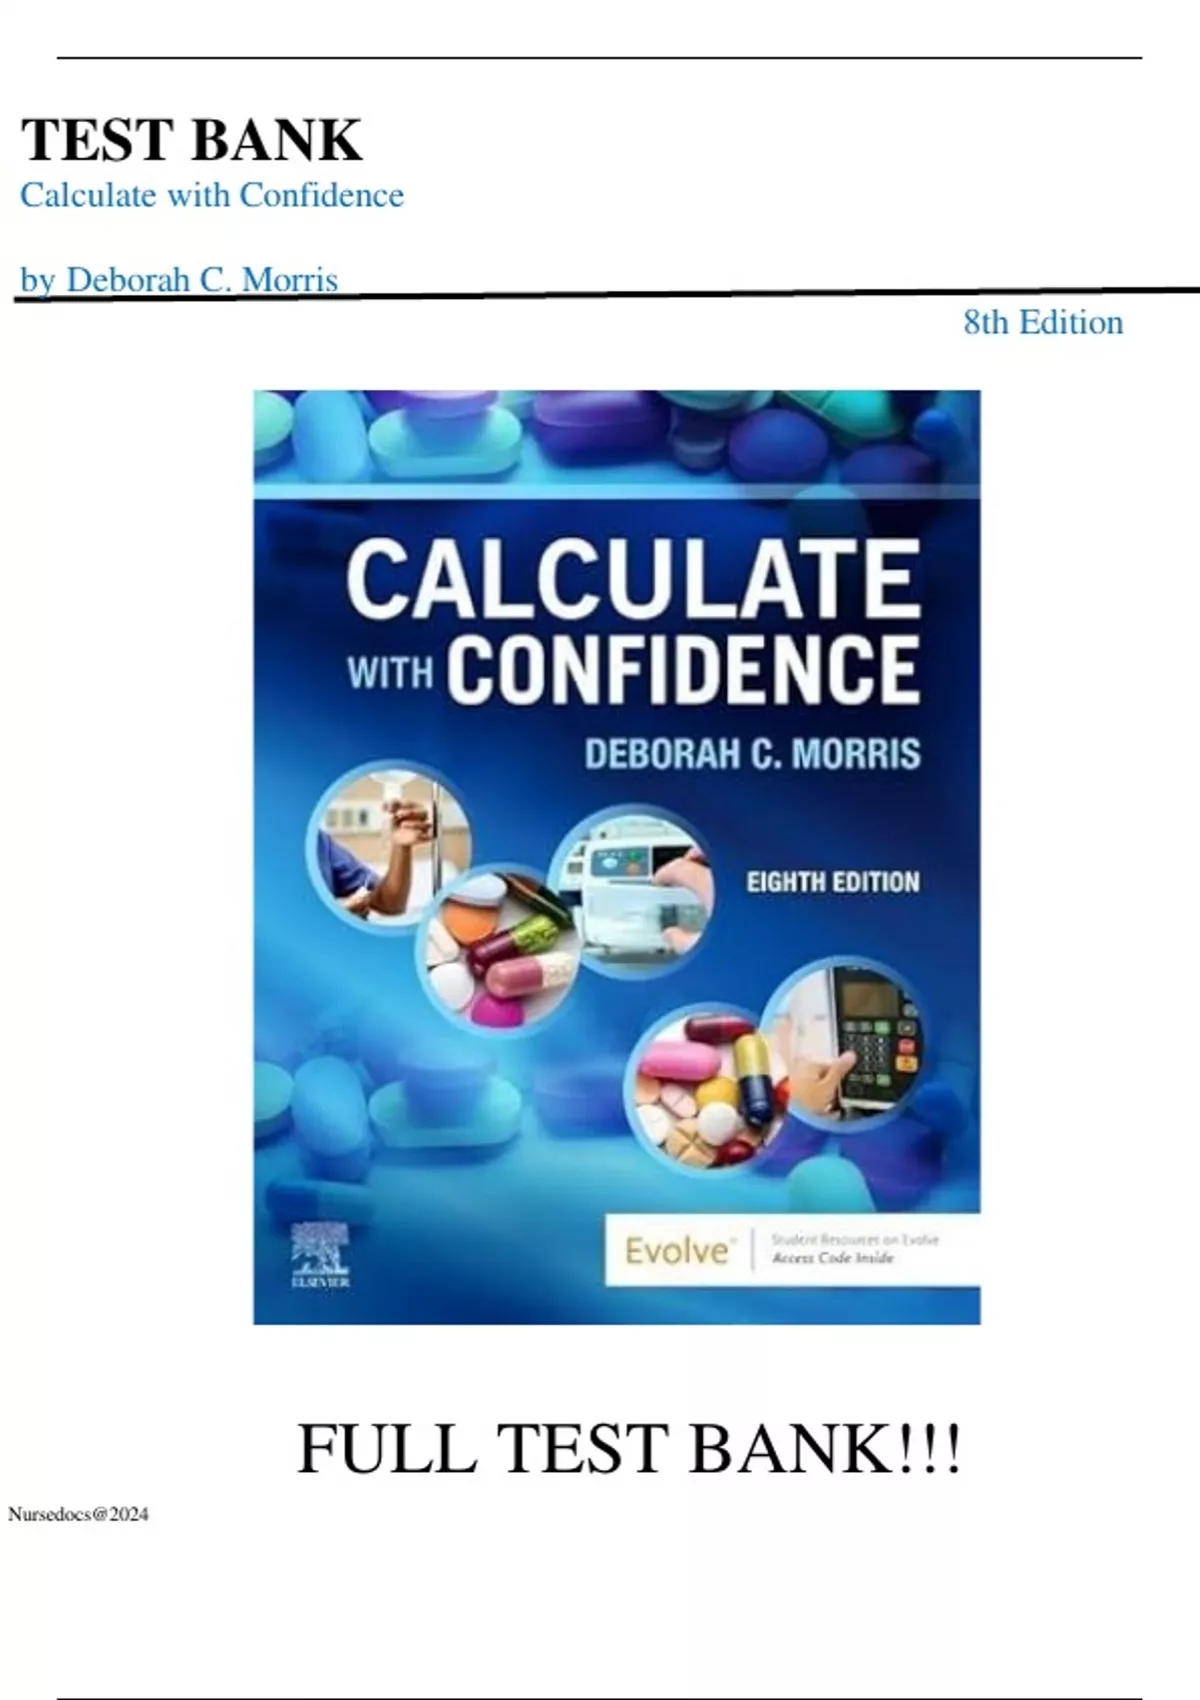 Test Bank For Calculate with Confidence 8th Edition by Deborah C 